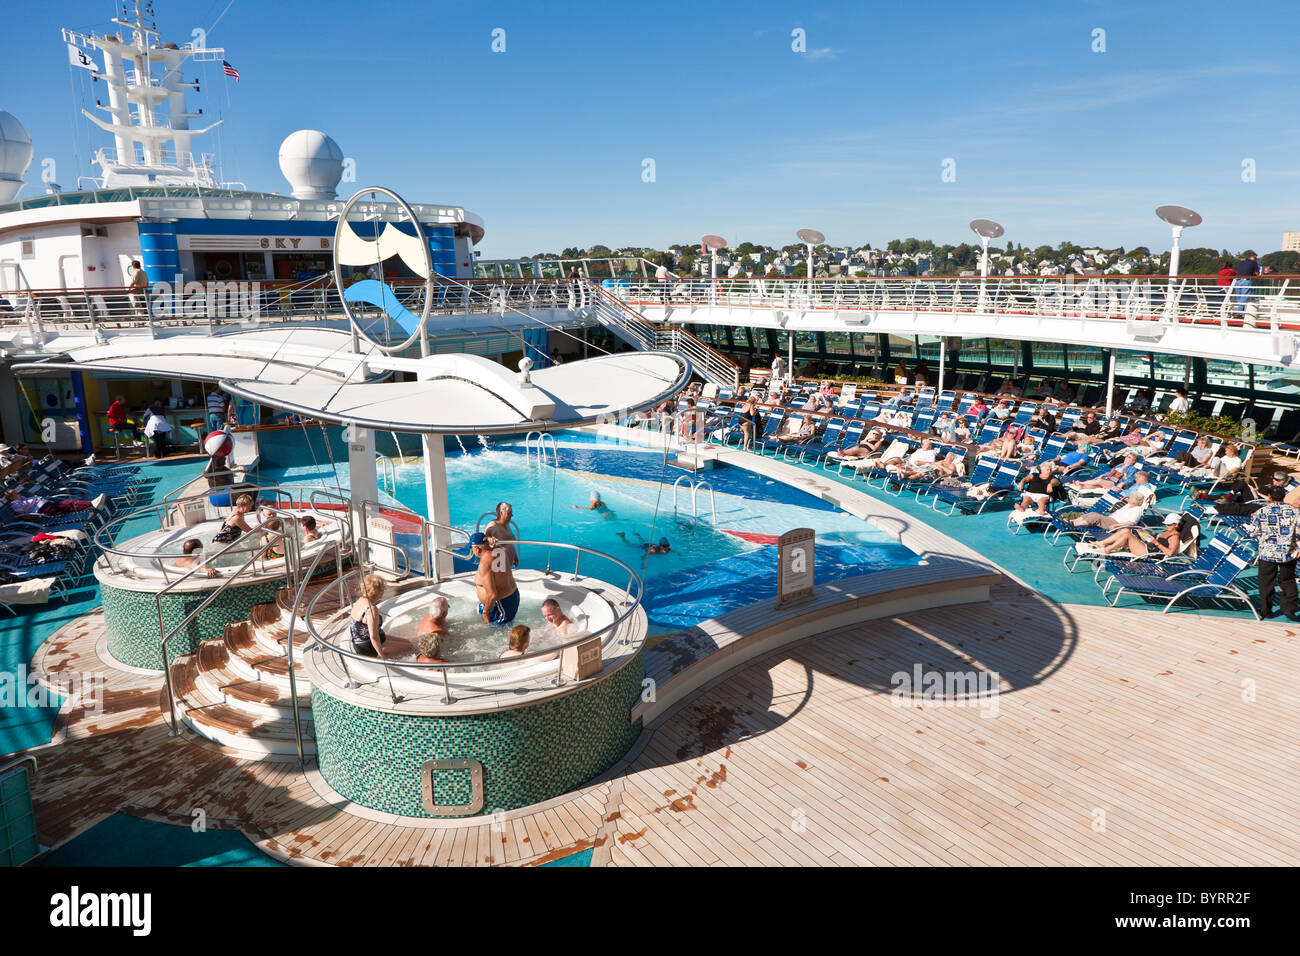 Senior men and women sit in hot tub and on lounge chairs on the deck of Royal Caribbean's Jewel of the Seas cruise ship Stock Photo